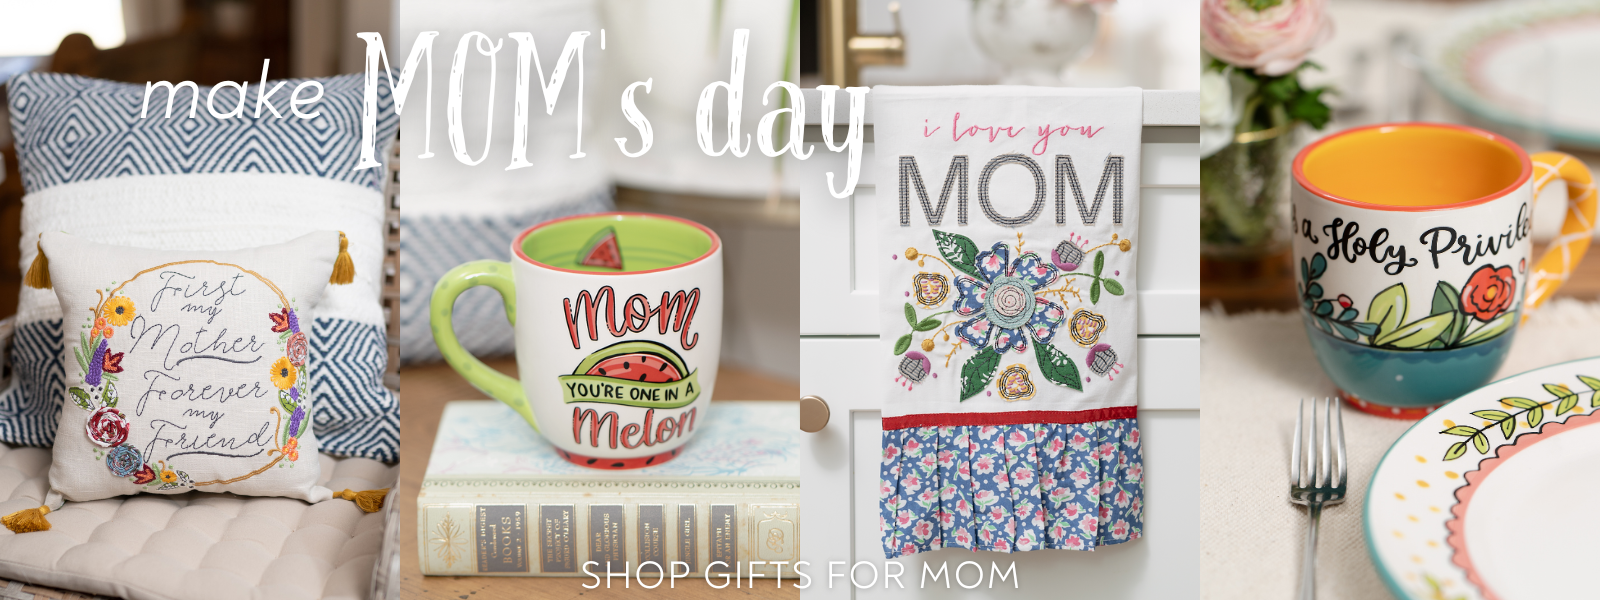 make mom's day - shop gifts for mom